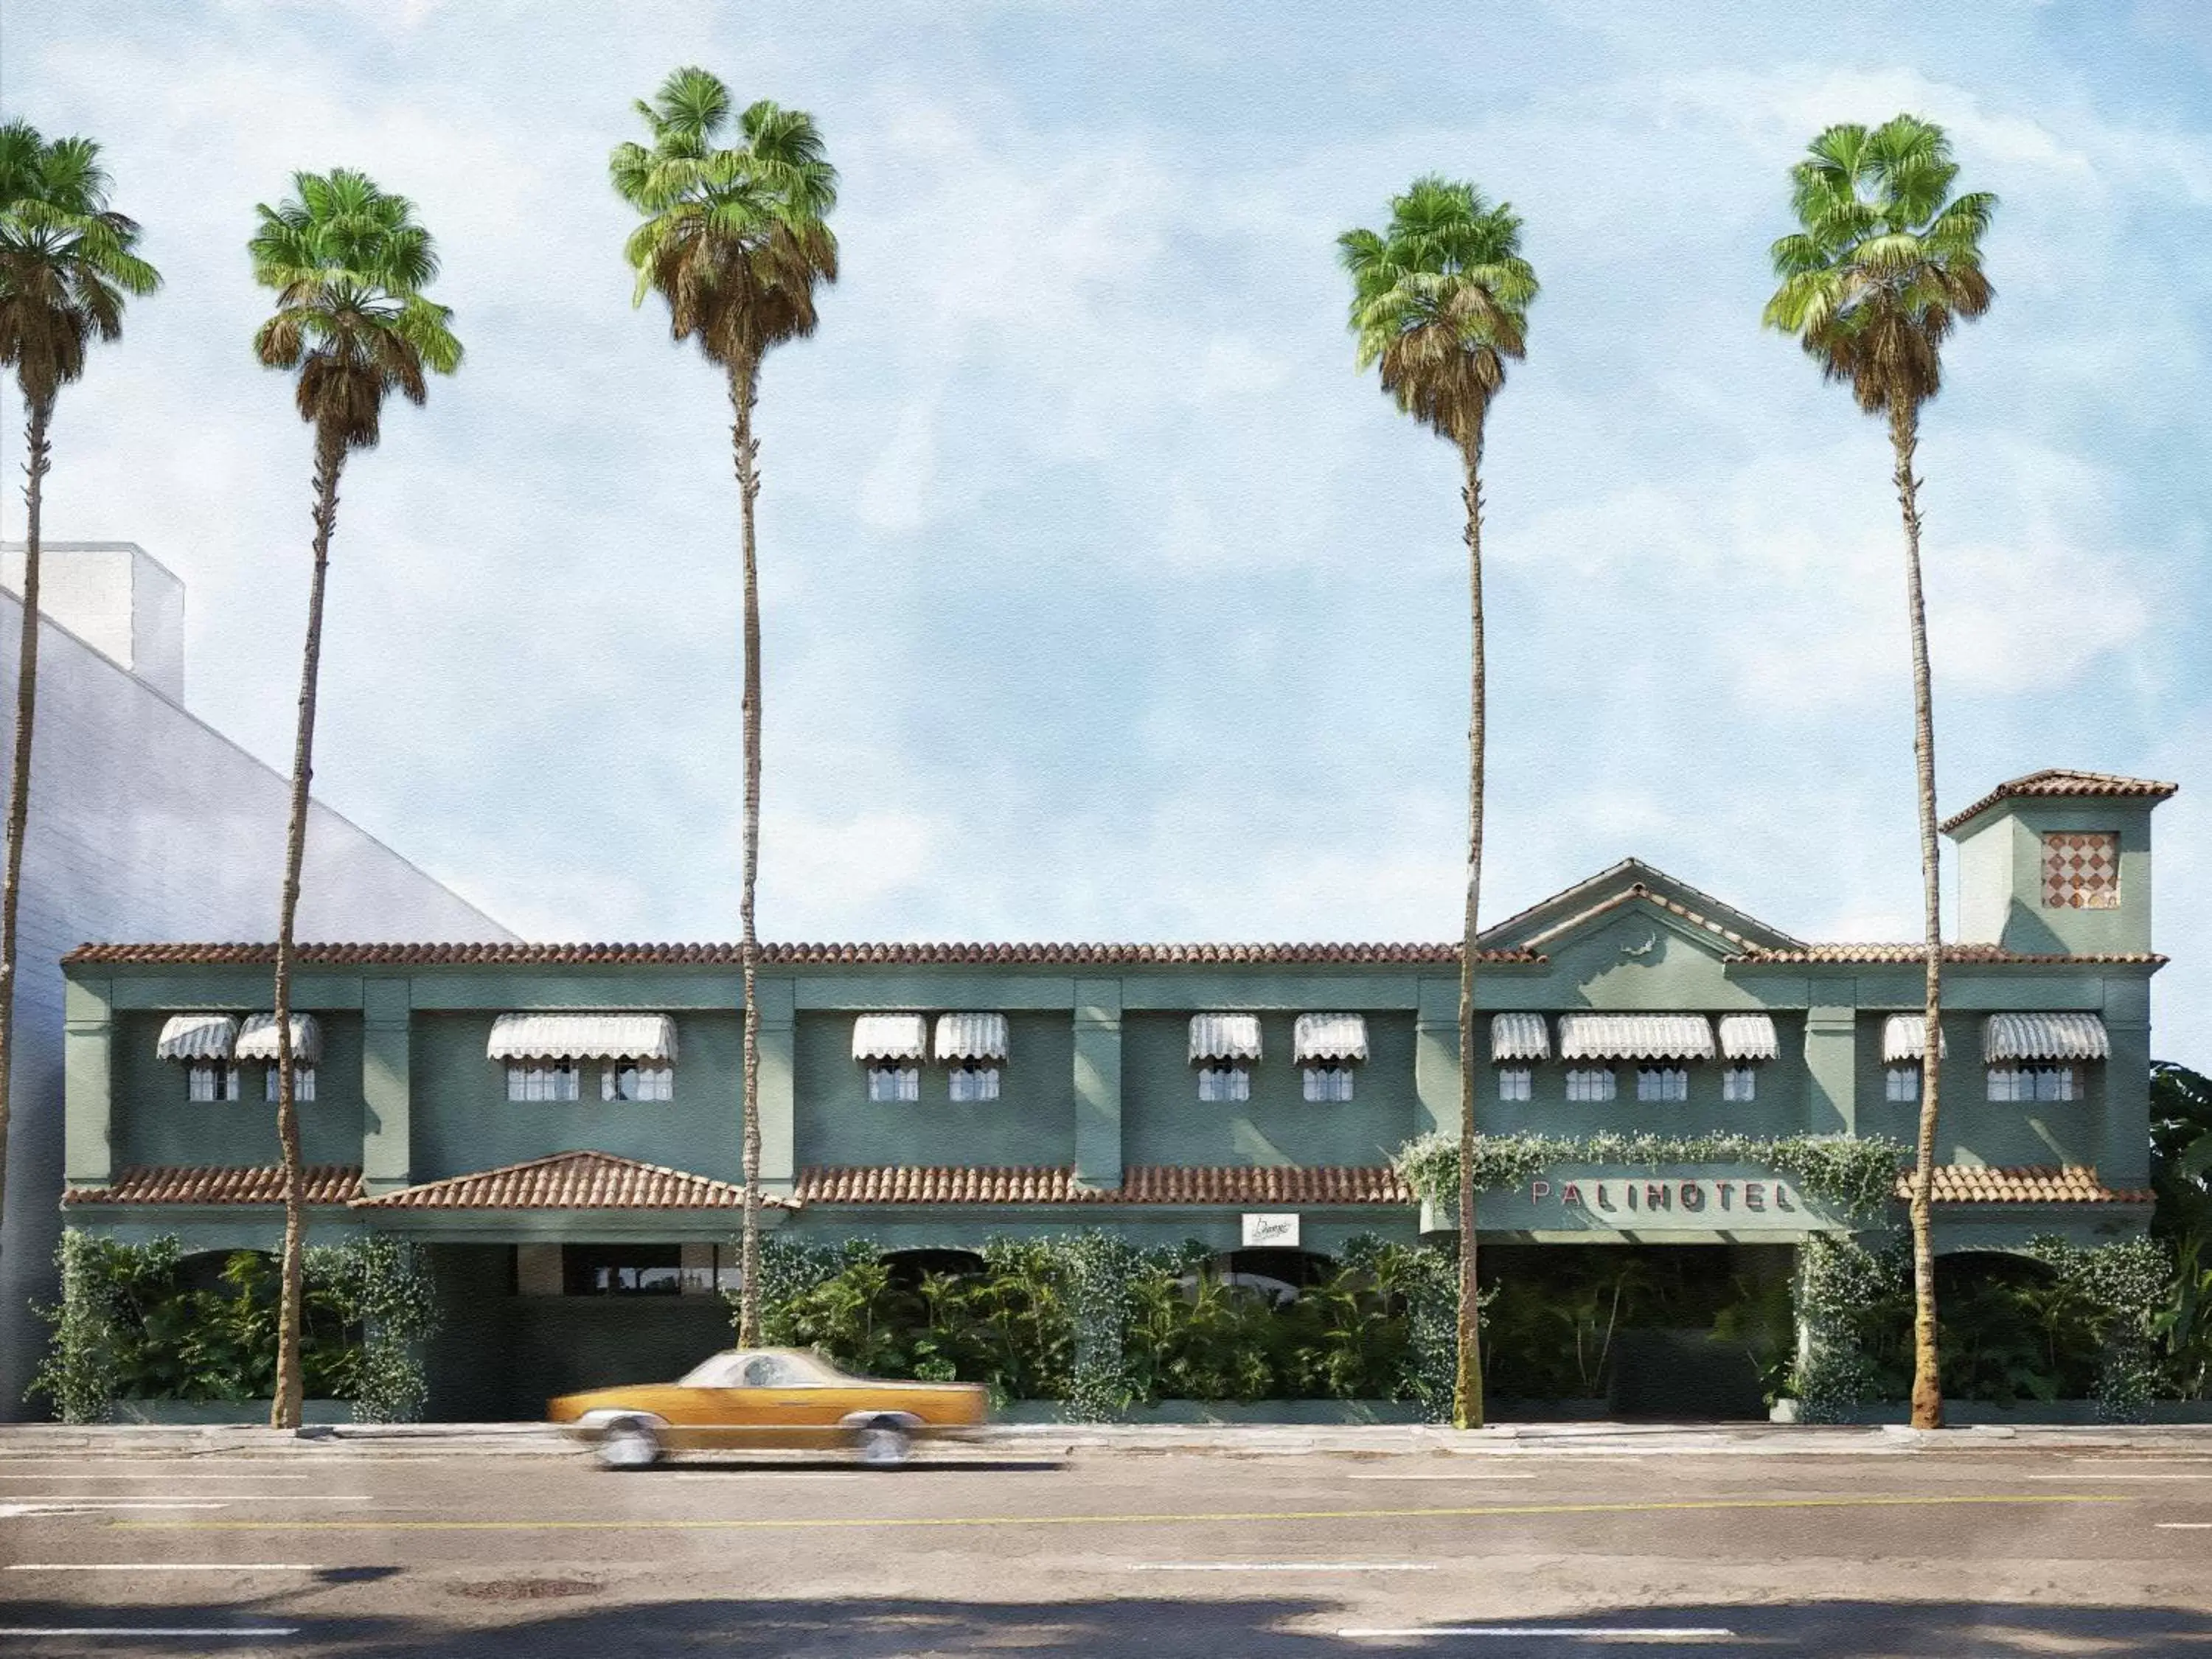 Property Building in Palihotel Hollywood